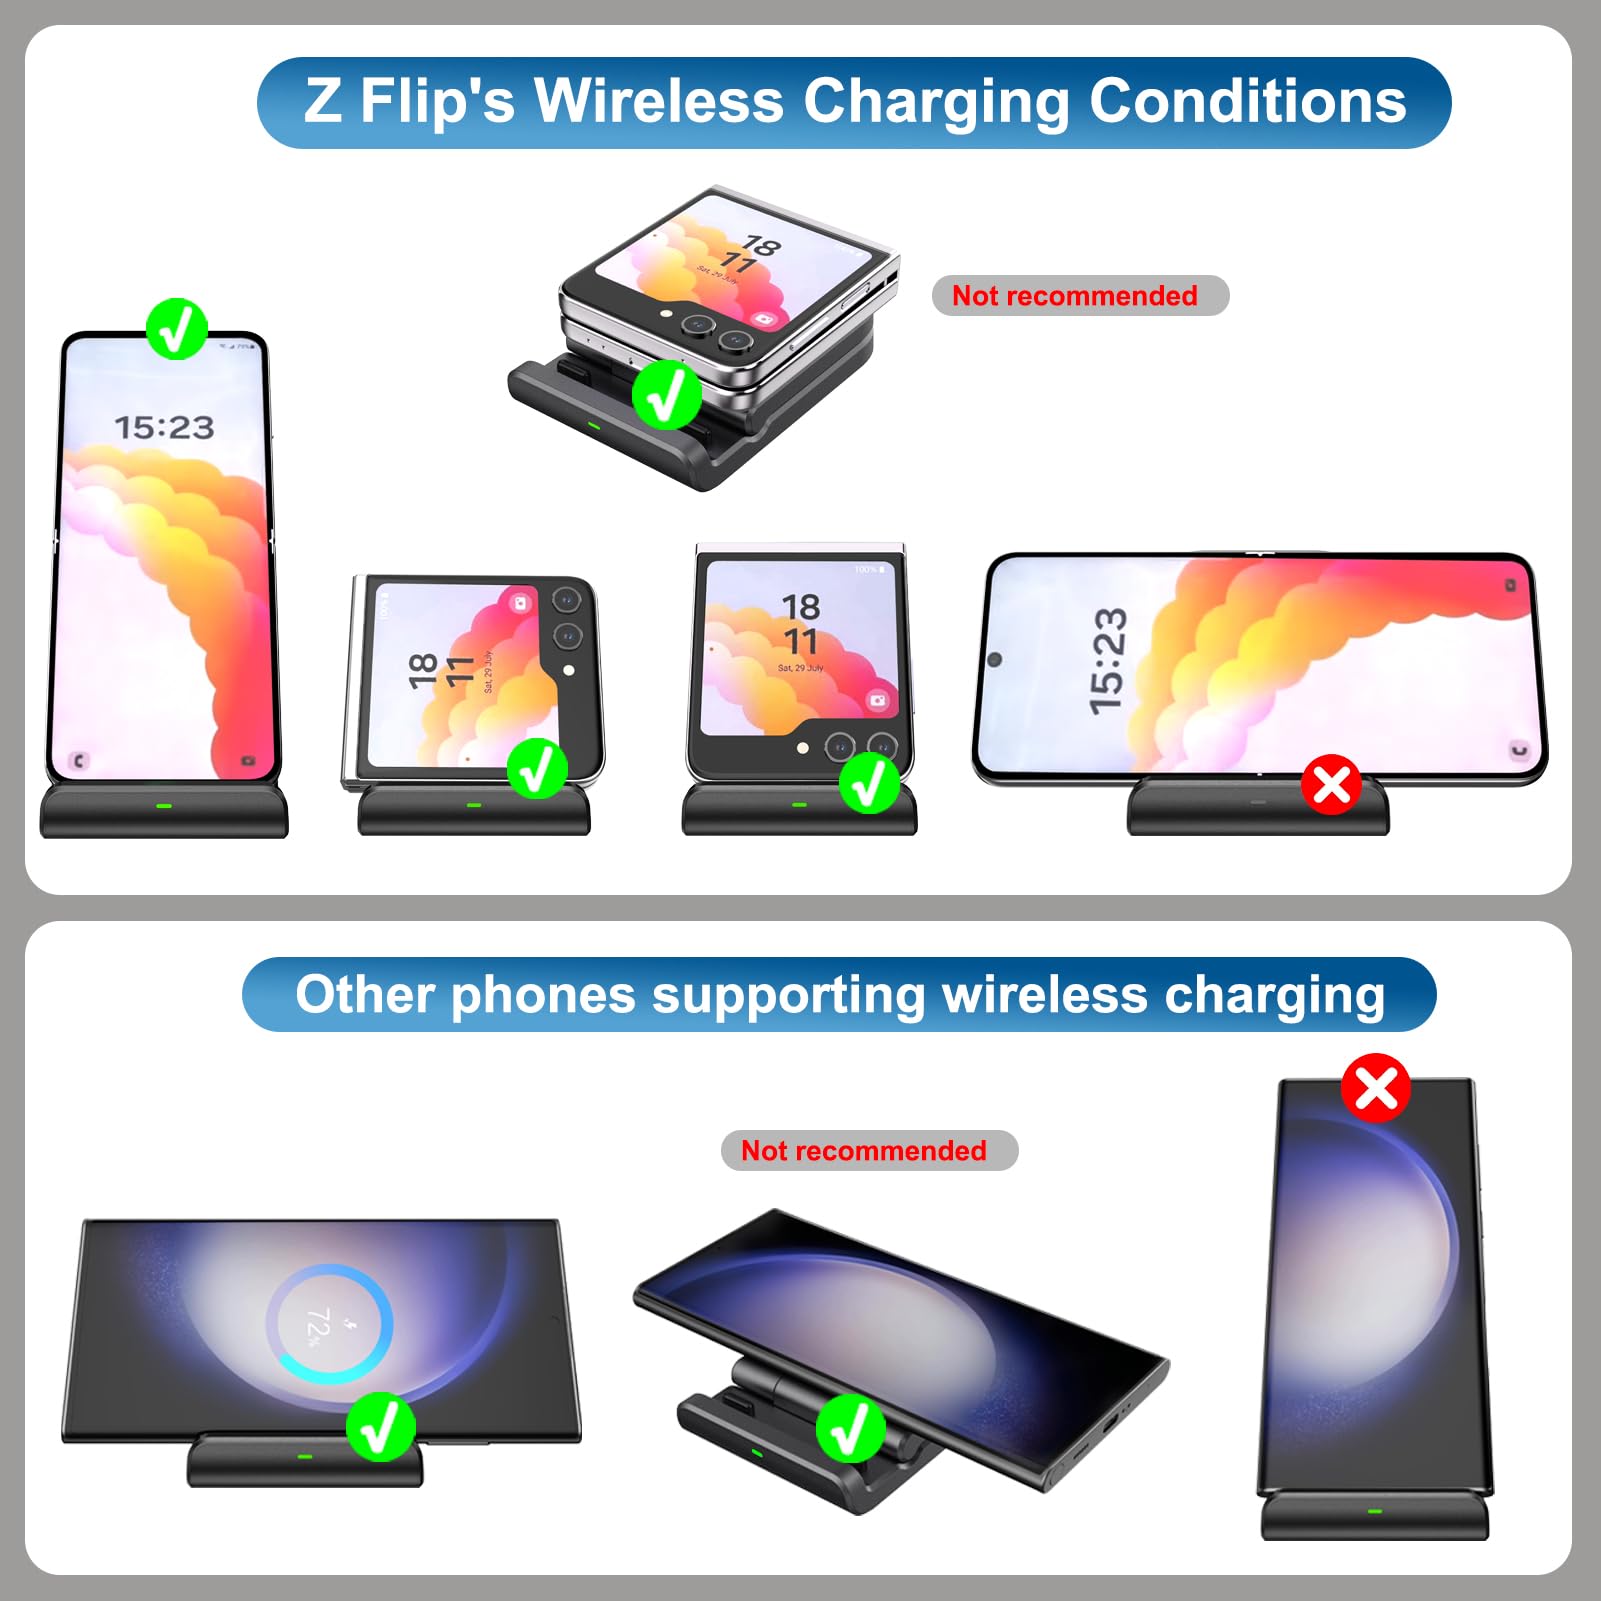 SwanScout Wireless Charger for Samsung Z Flip, Foldable Fast Wireless Charging Stand for Samsung Galaxy Z Flip 5/Z Flip 4/Z Flip 3, Samsung Charging Station for Galaxy Z Flip Series (No Adapter)